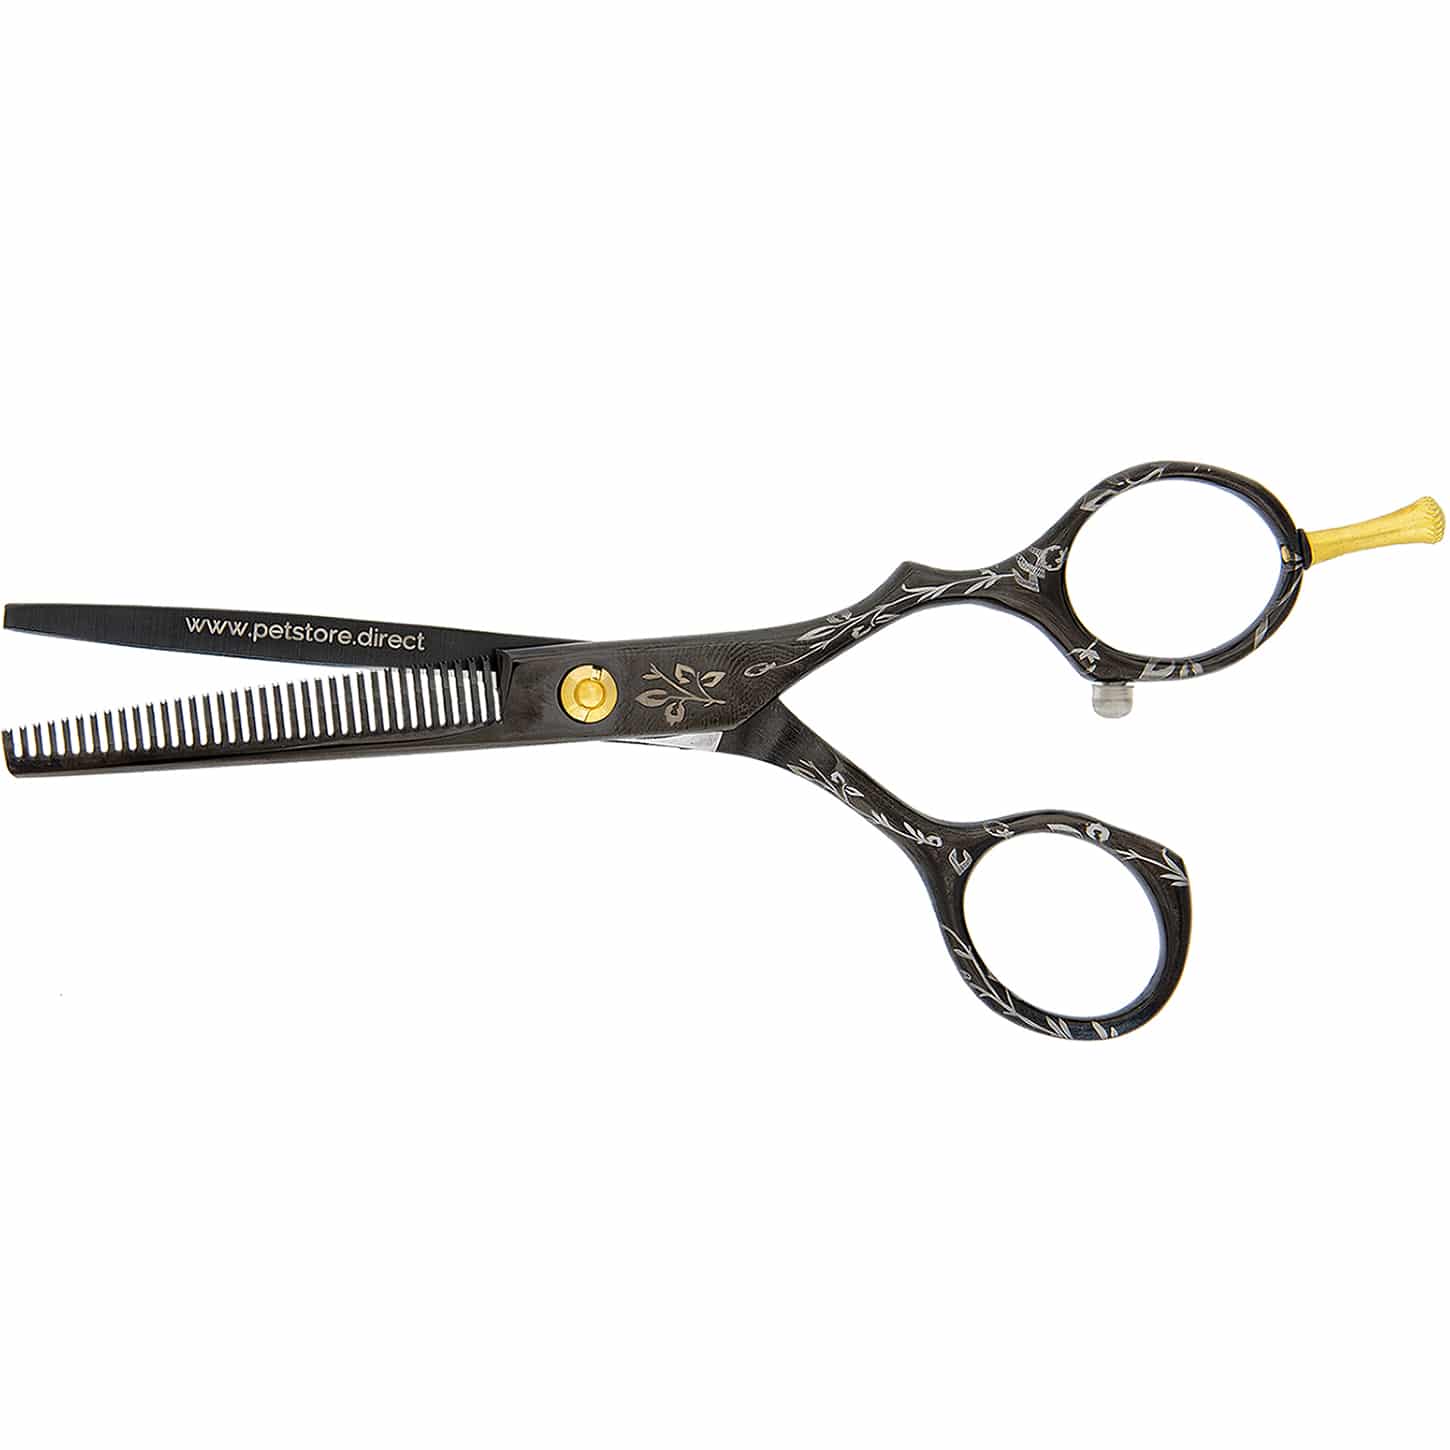 petstore direct thinning shears for groomers